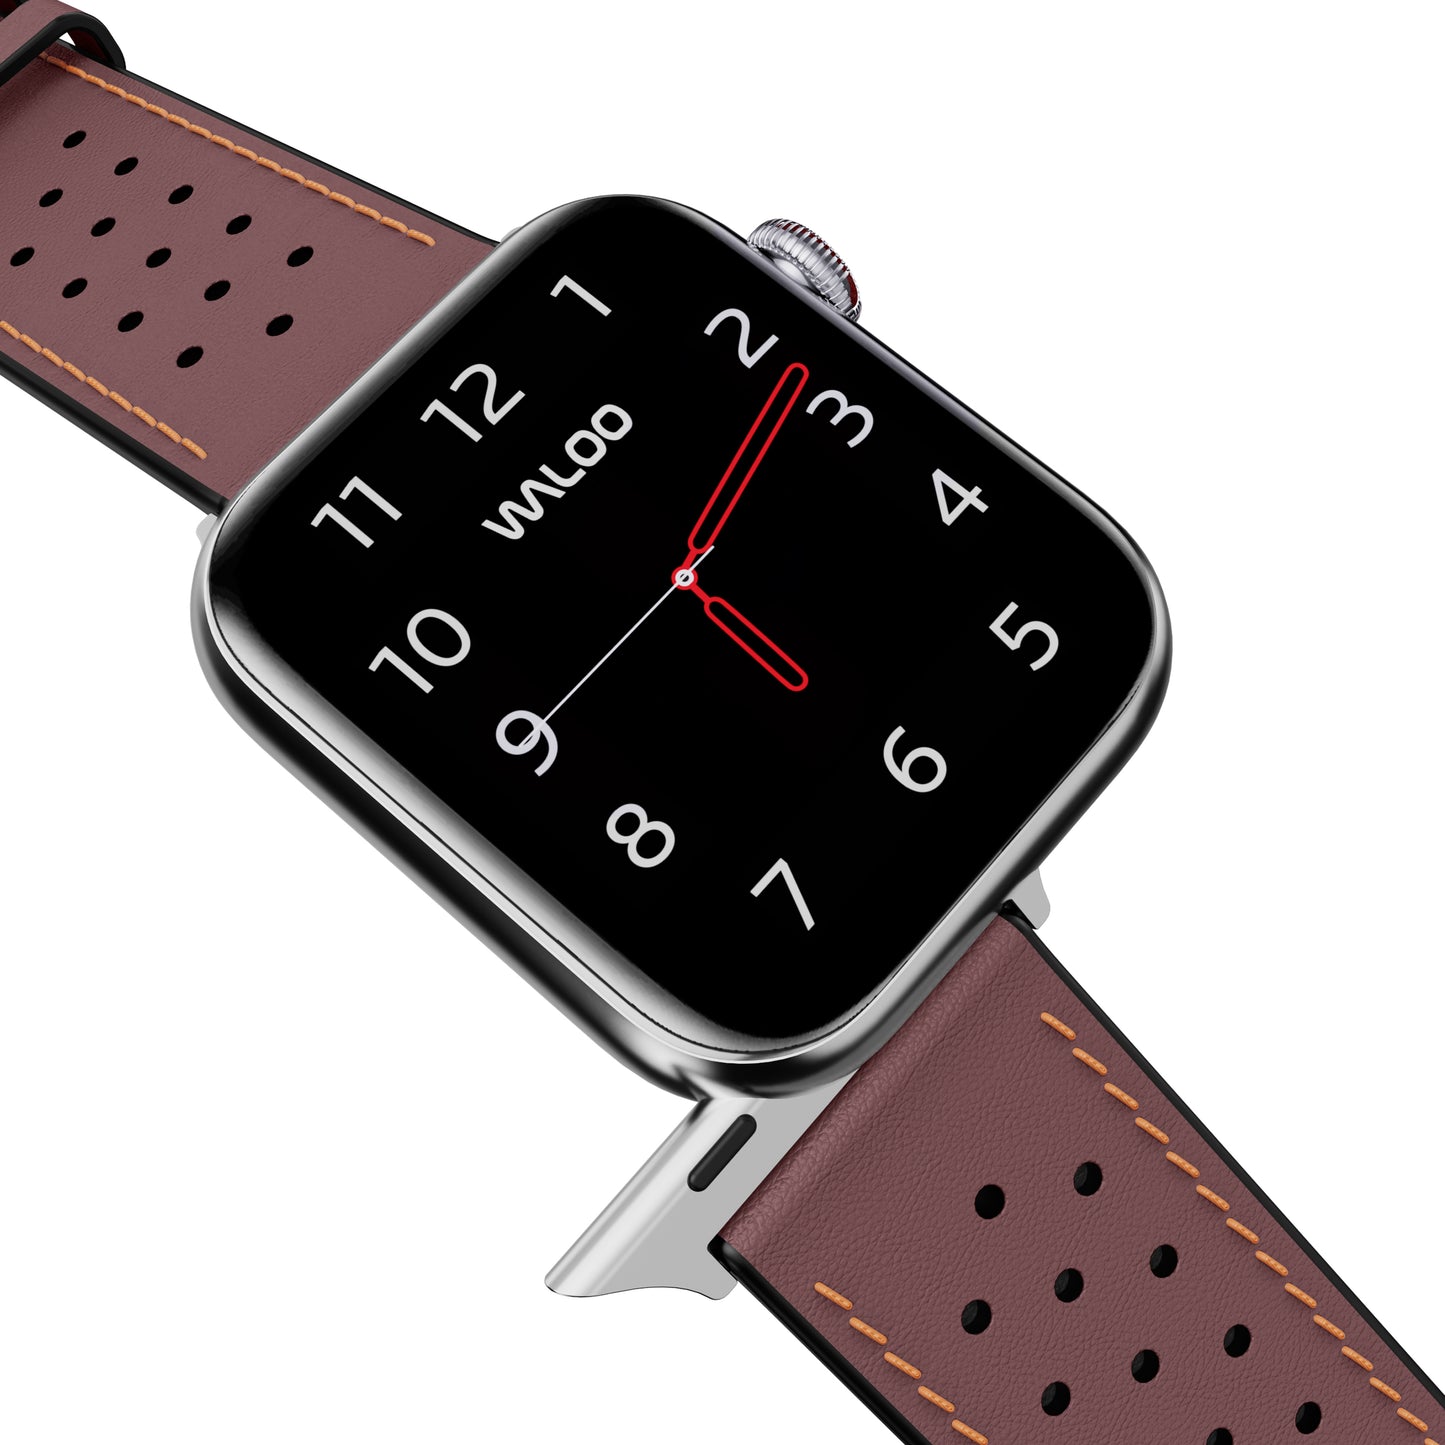 Waloo Breathable Leather Band For Apple Watch